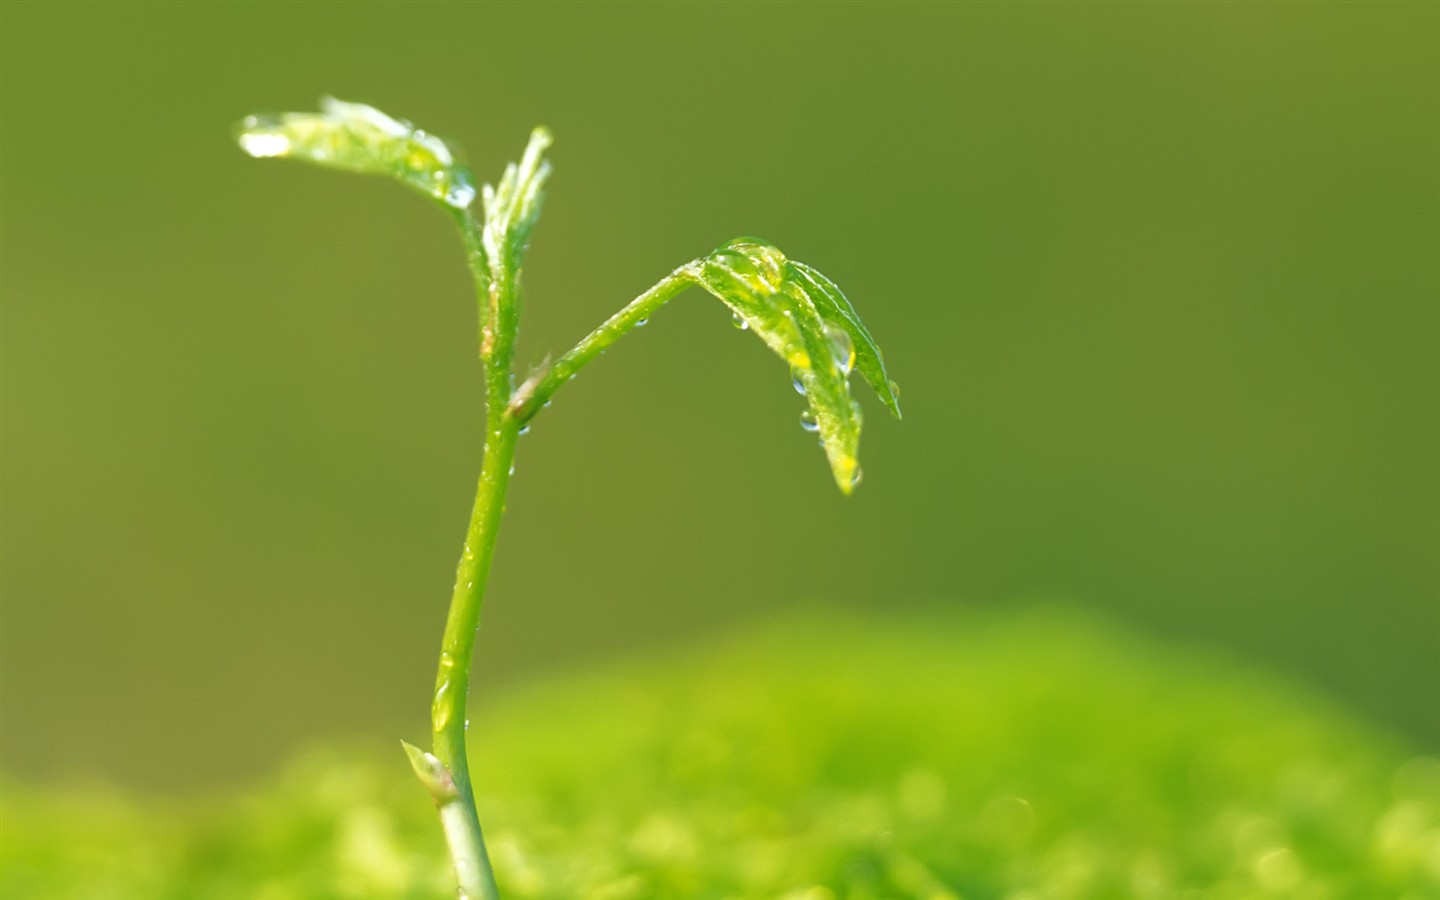 Sprout leaves HD Wallpaper (2) #38 - 1440x900